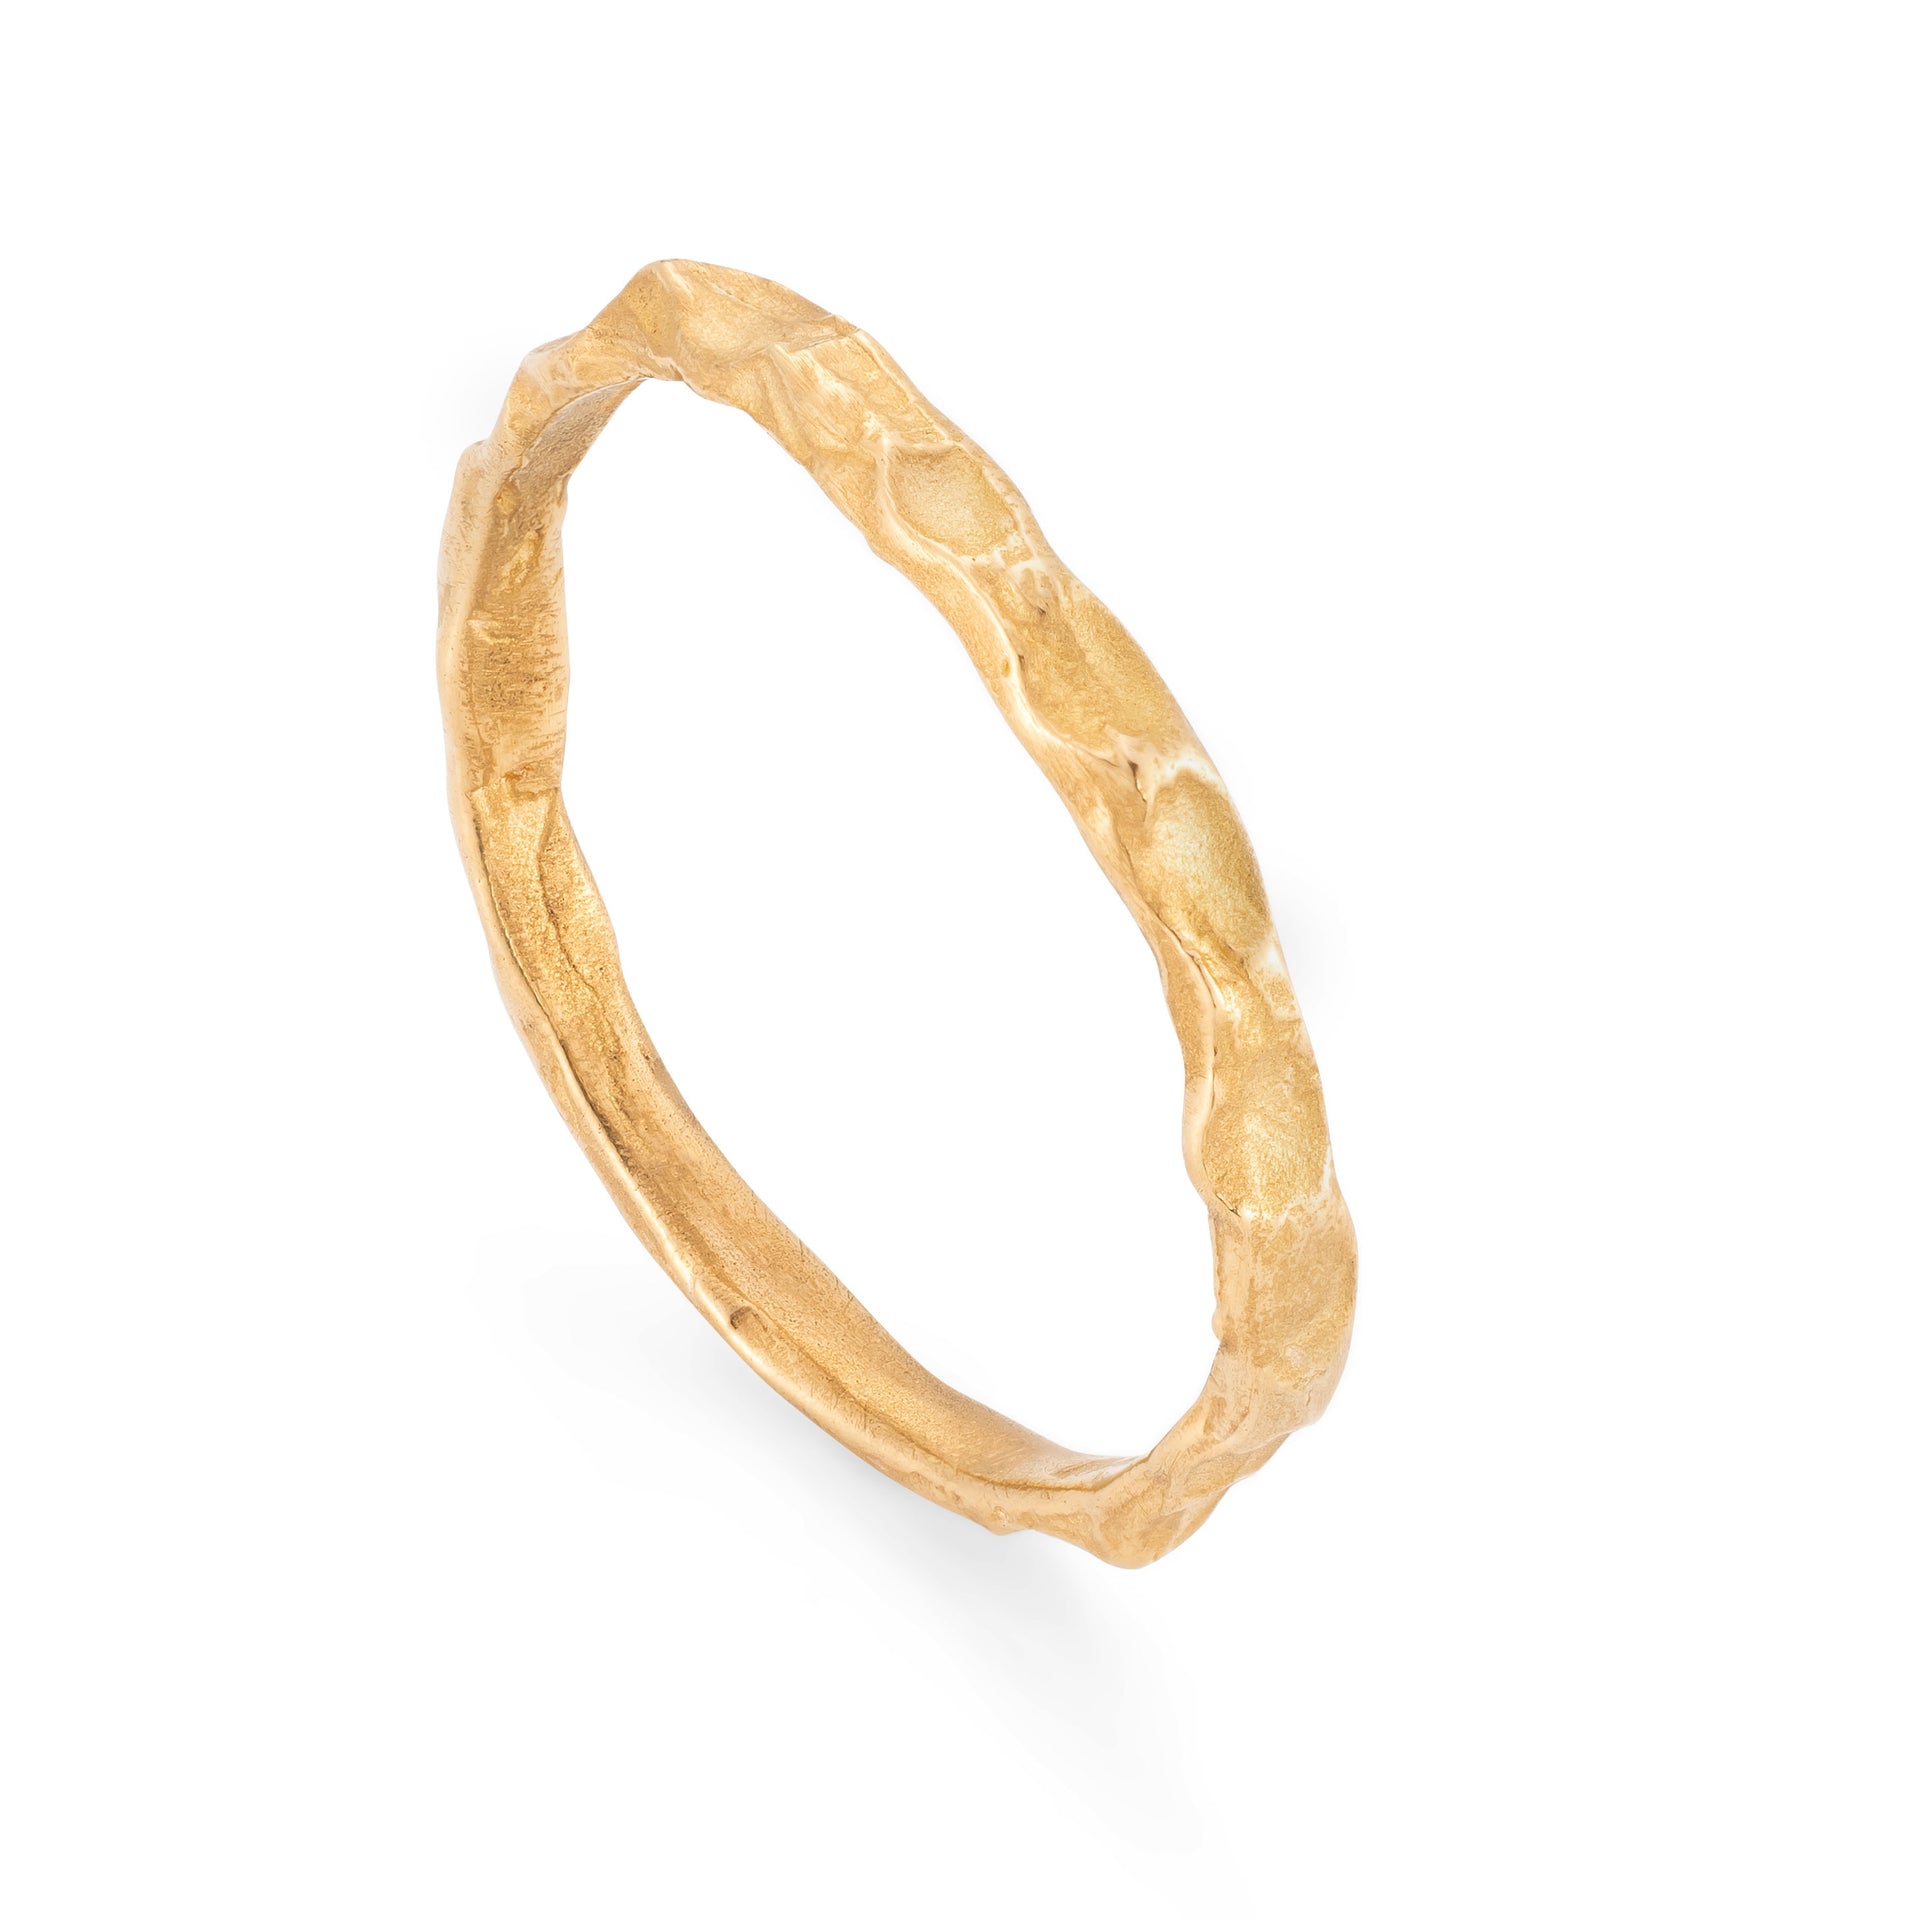 Cockle Skinny Ring 22ct Gold